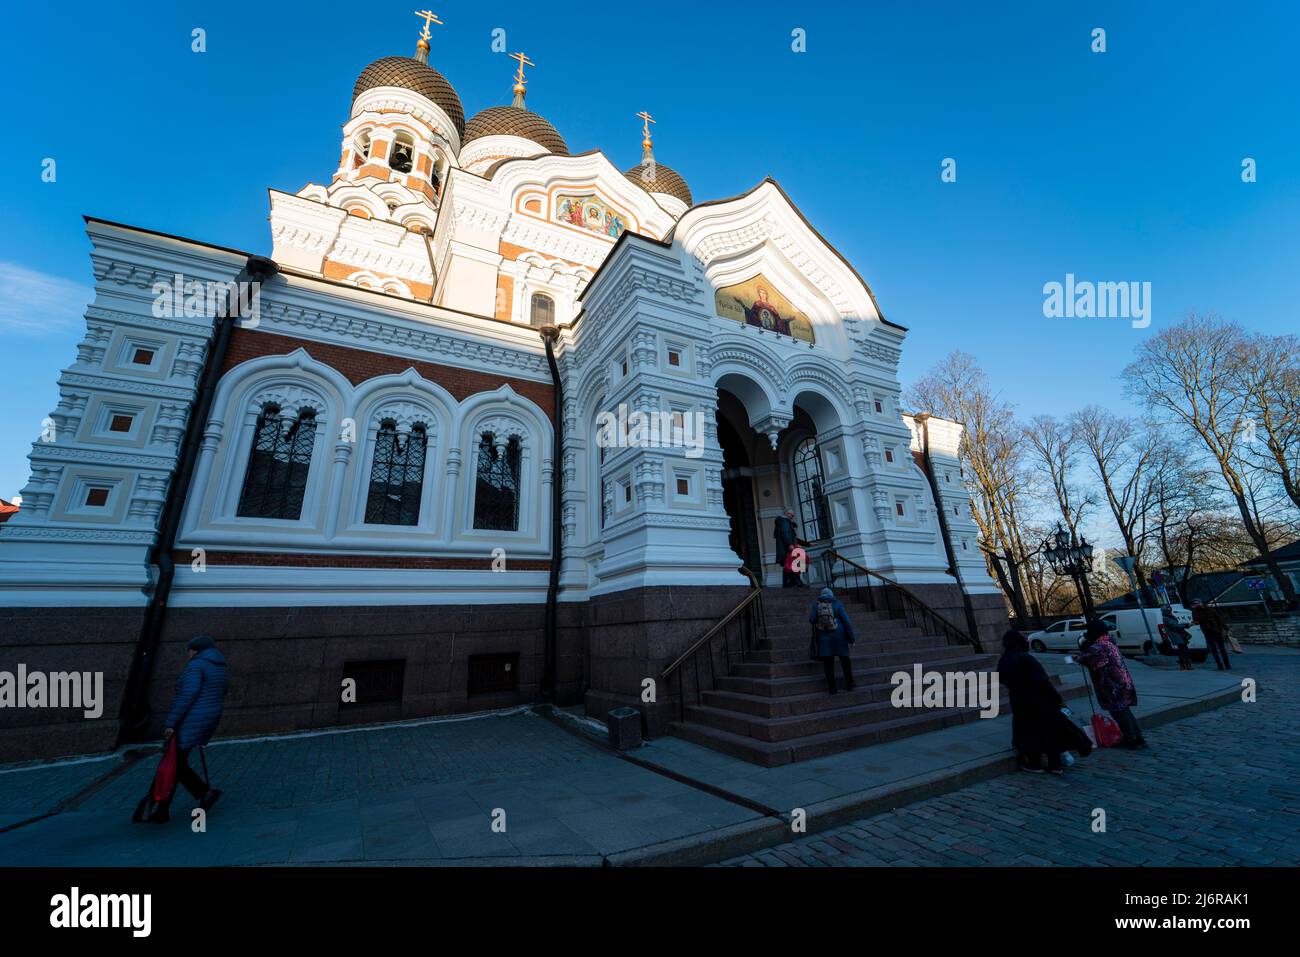 Alexander Nevsky Cathedral, Tallinn - Is an orthodox cathedral on Toompea hill in central Tallinn, Estonia. Stock Photo